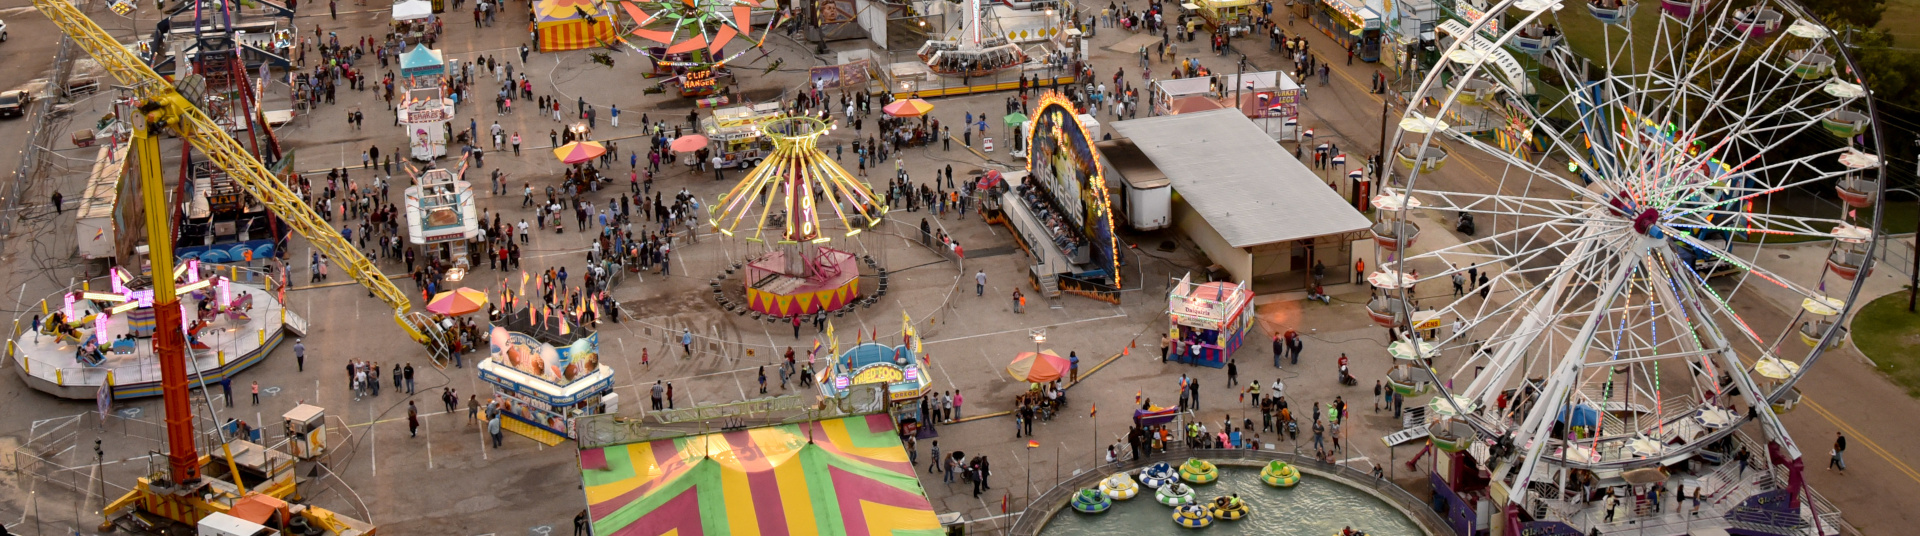 The State Fair of Louisiana - The official state fair | Business View Magazine